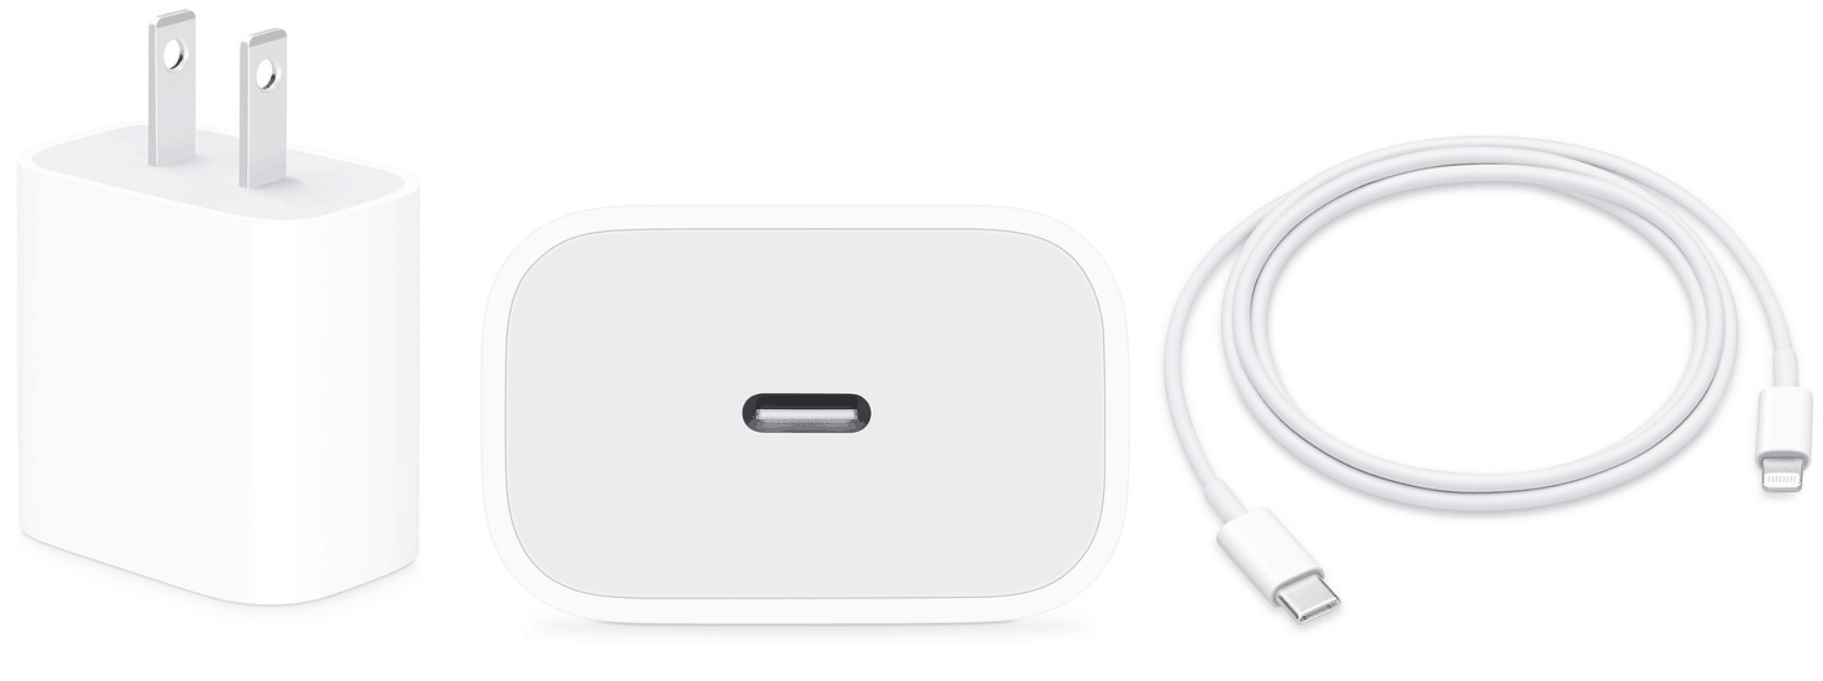 Sale > new iphone charging box > in stock